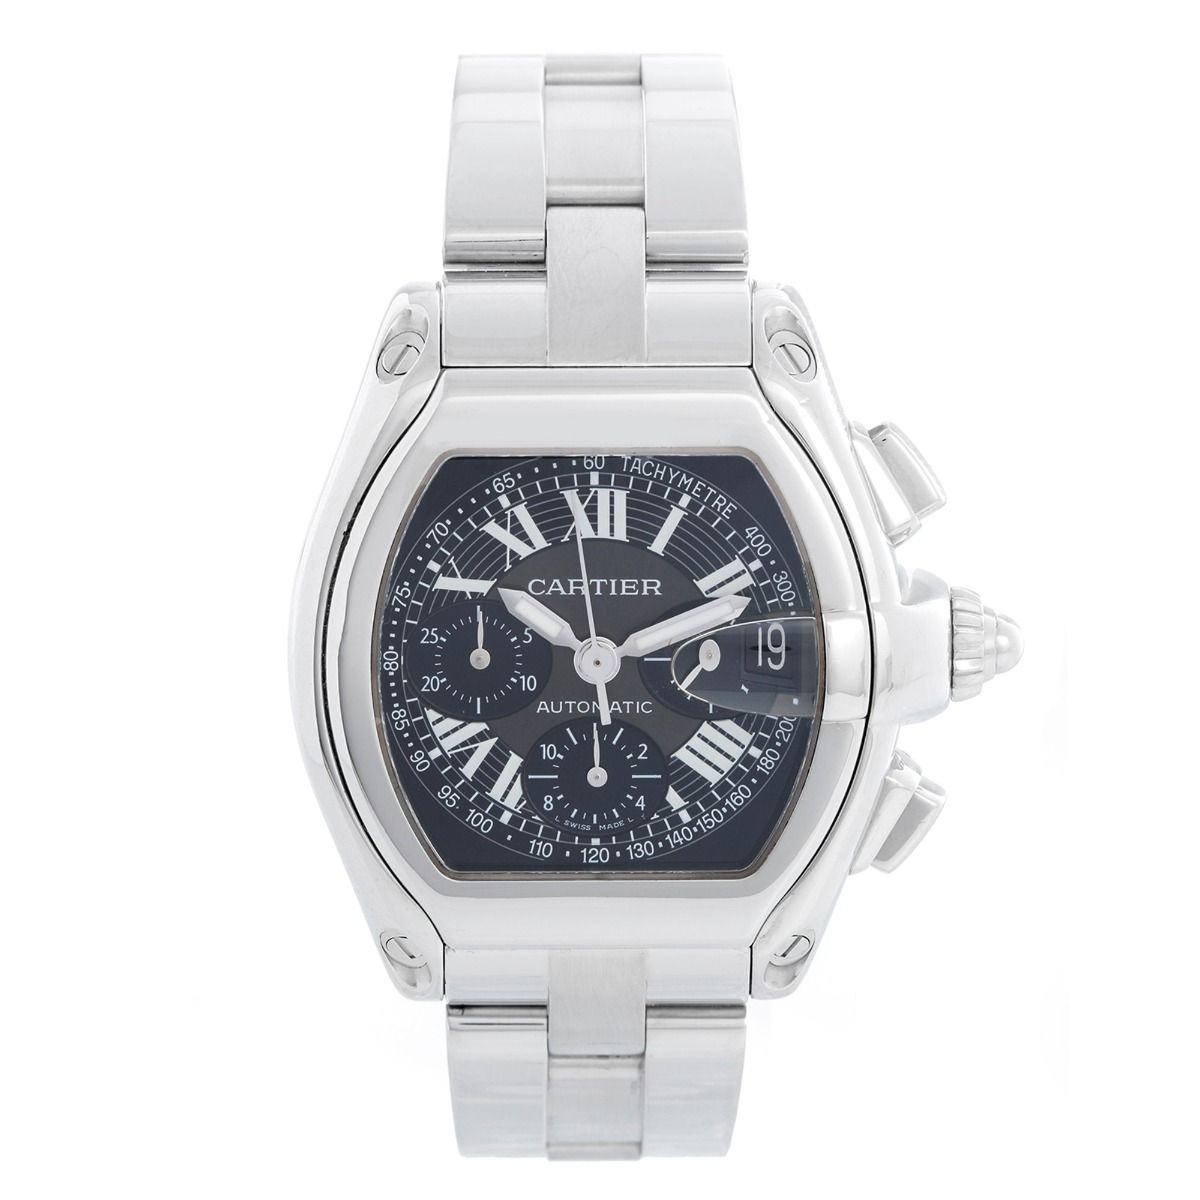 Cartier Roadster Chronograph Stainless Steel Men's Watch W62020X6